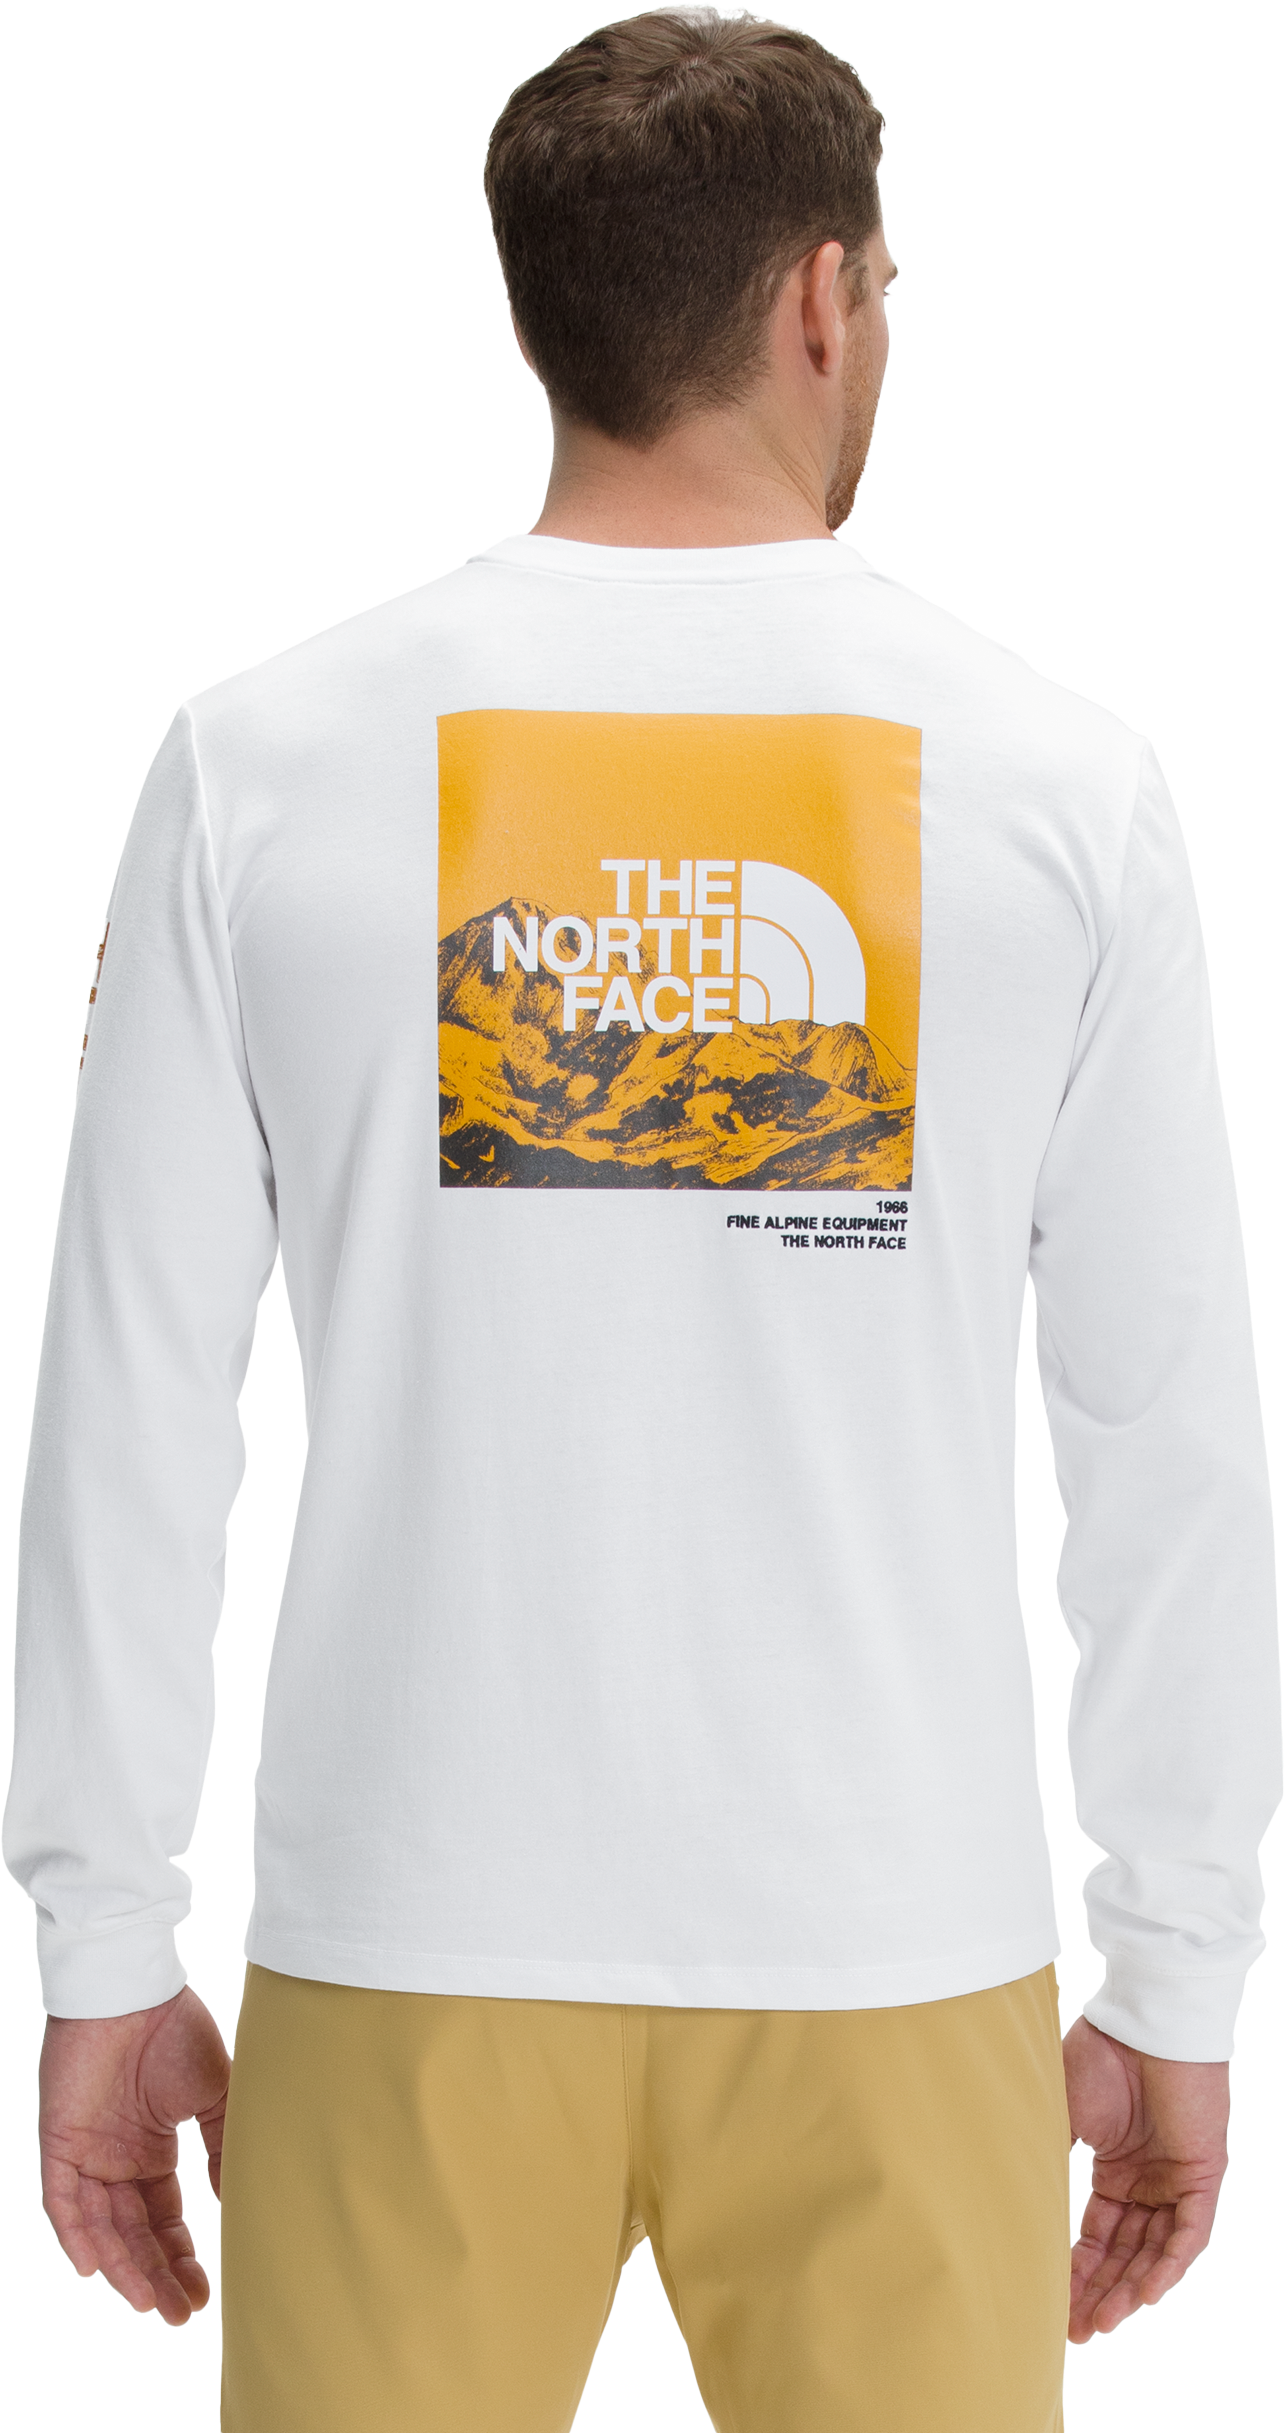 The North Face Logo Play Long-Sleeve T-Shirt for Men - TNF White - M